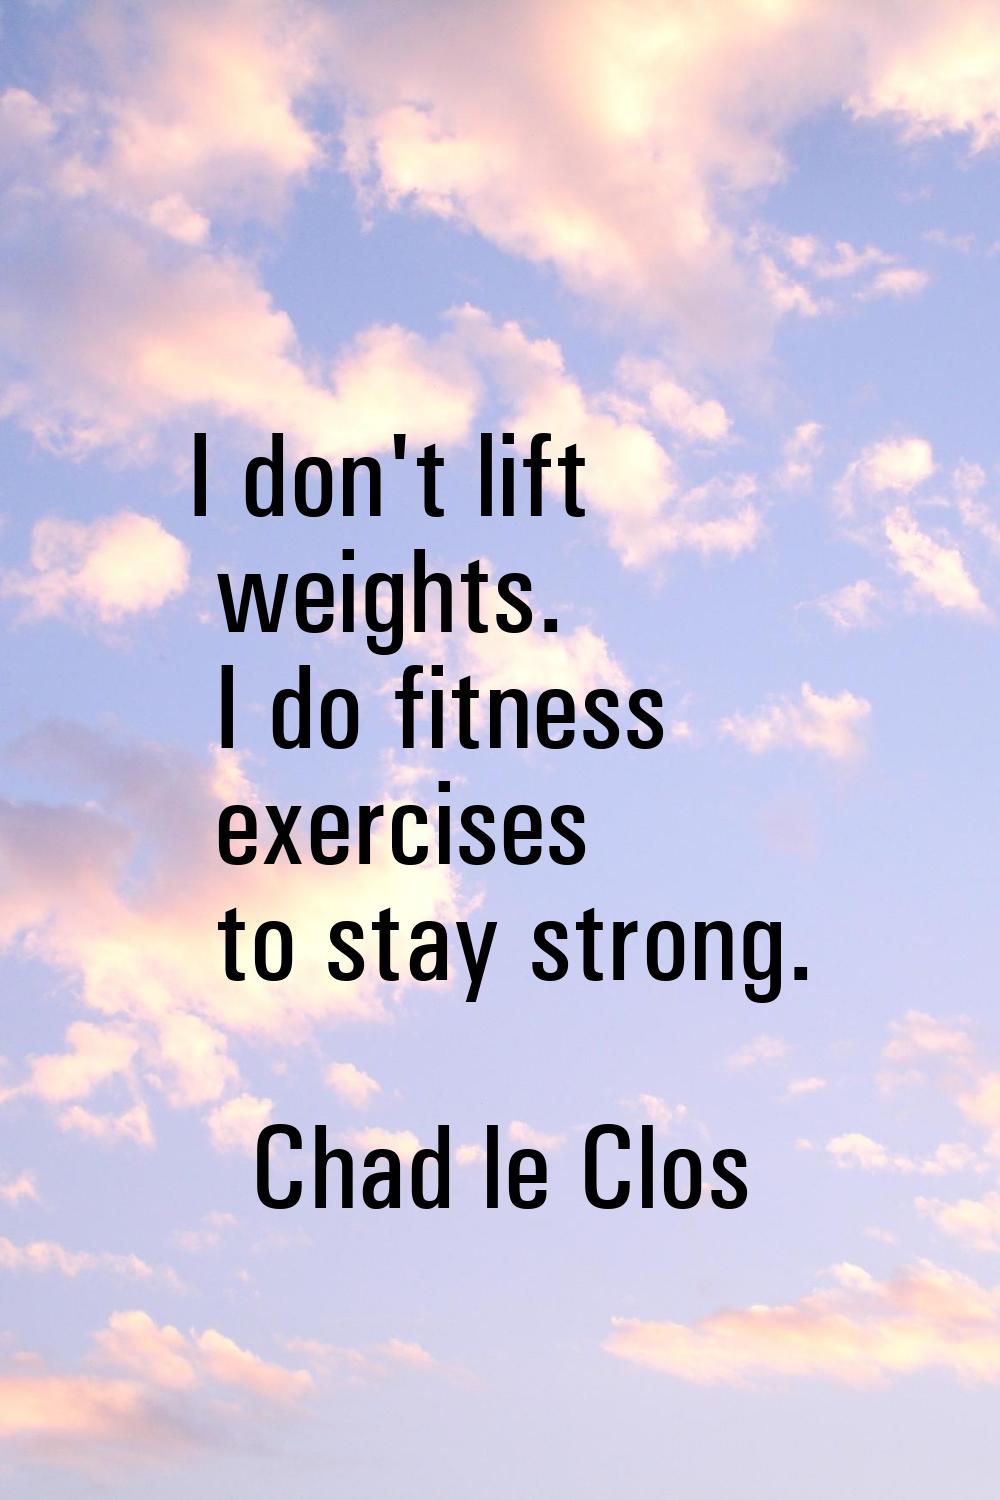 I don't lift weights. I do fitness exercises to stay strong.